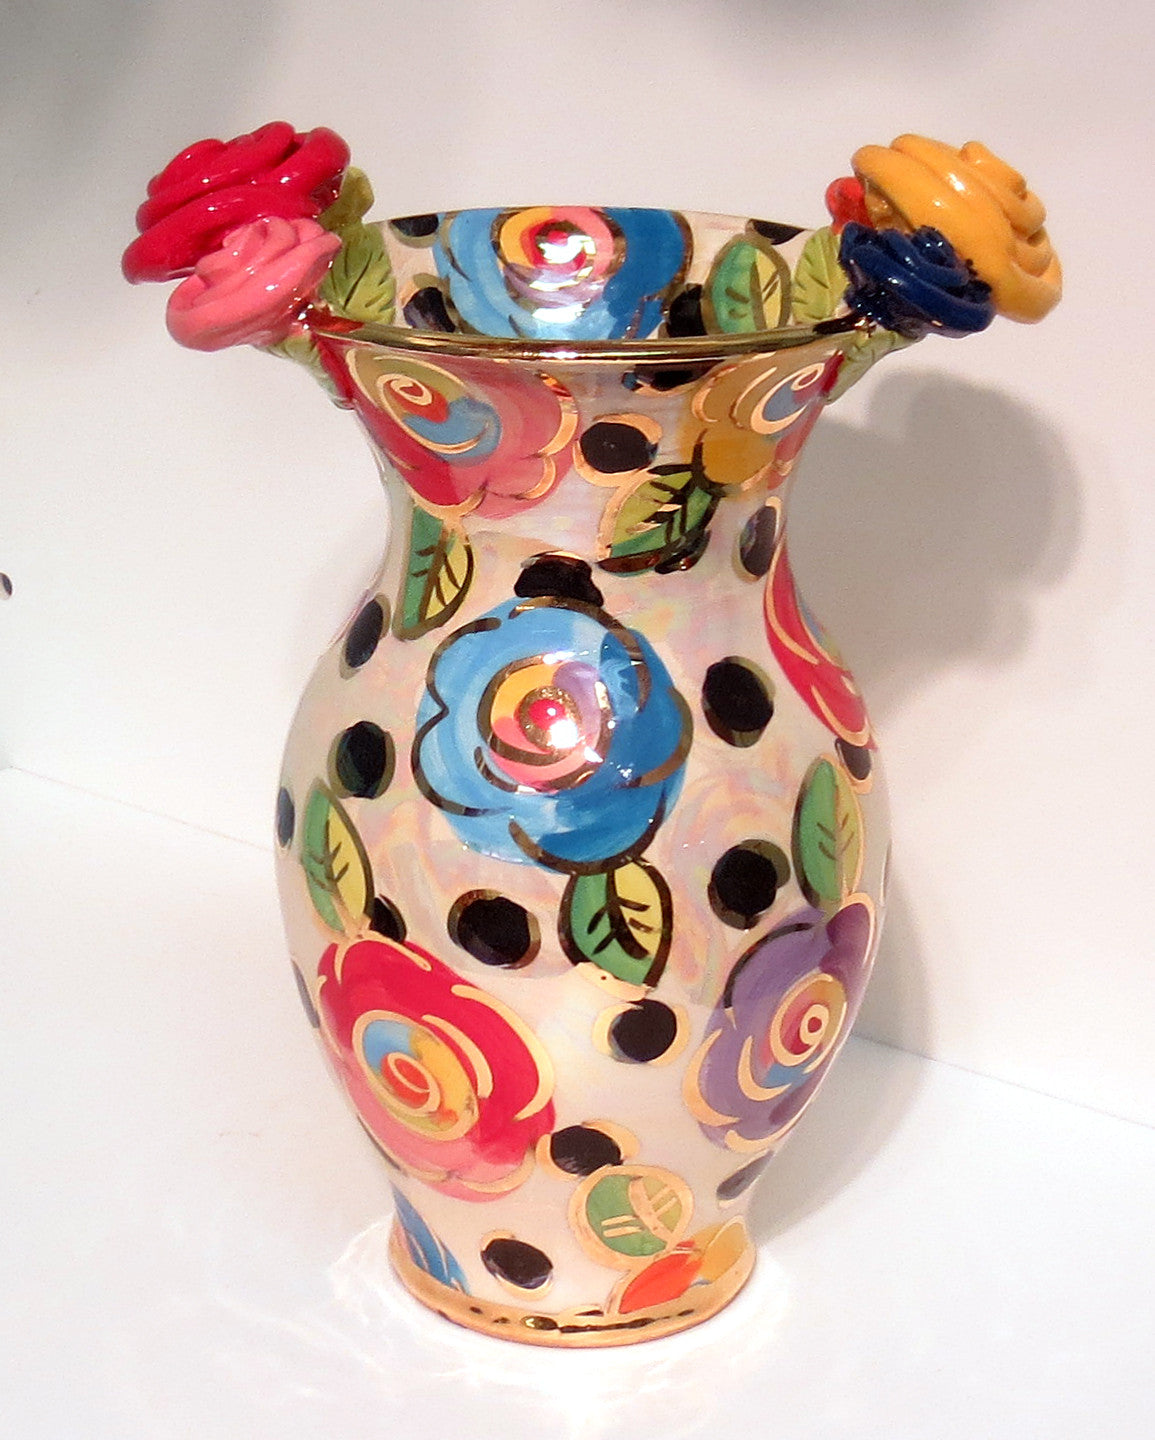 Large Vase "Roses on Black Dots" - MaryRoseYoung